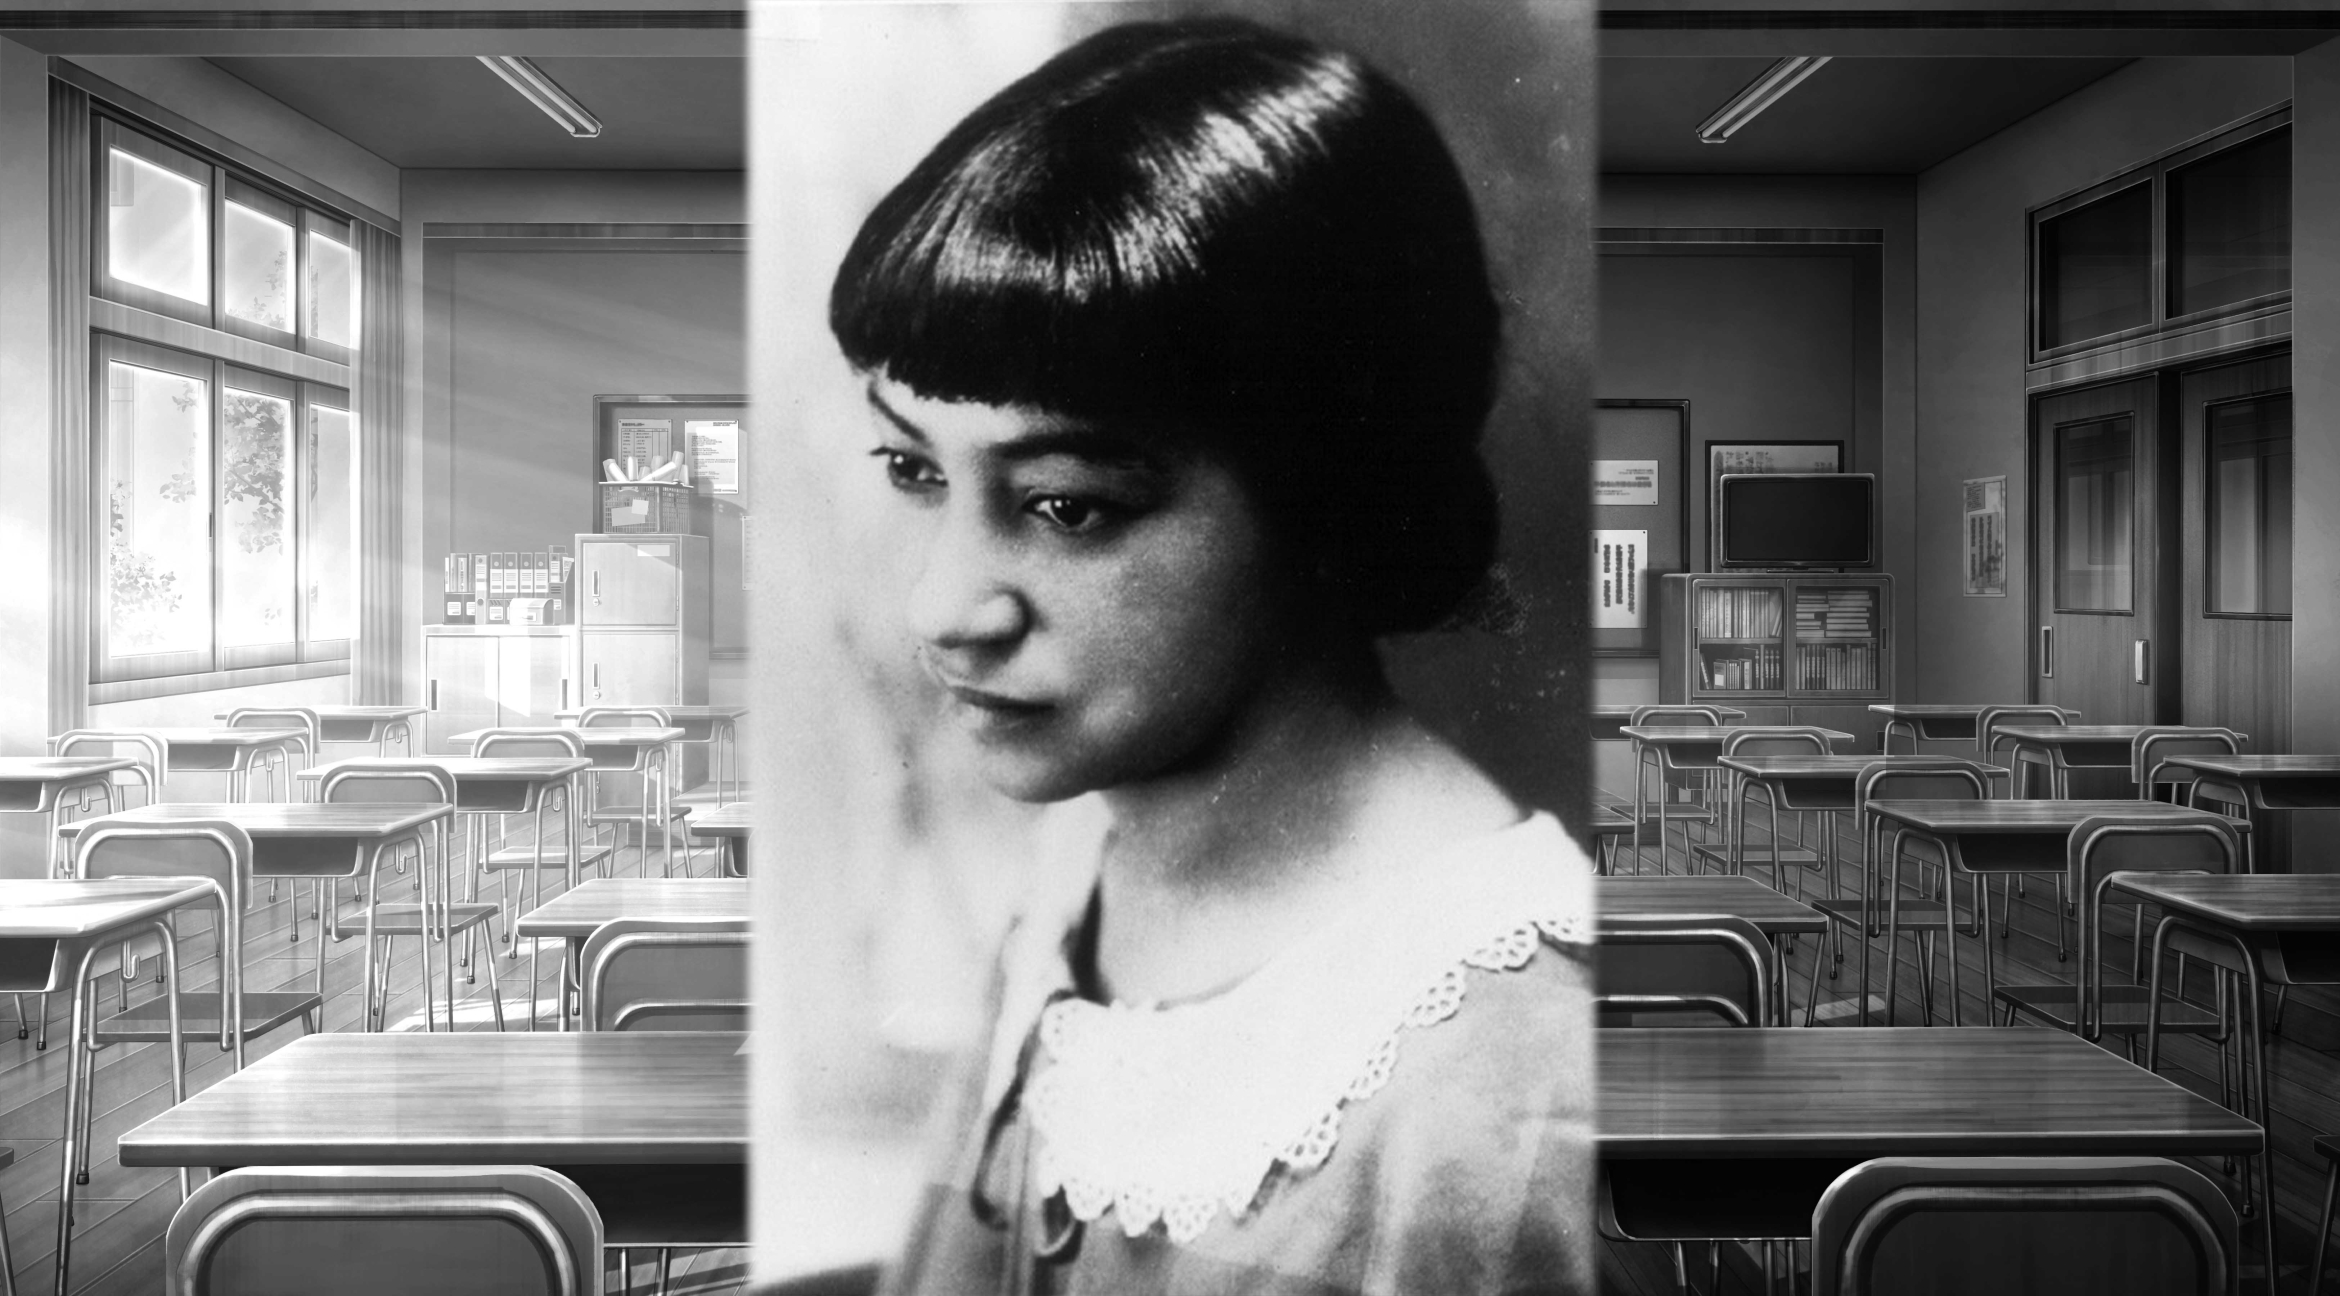 Inez Beverly Prosser superimposed over a classroom